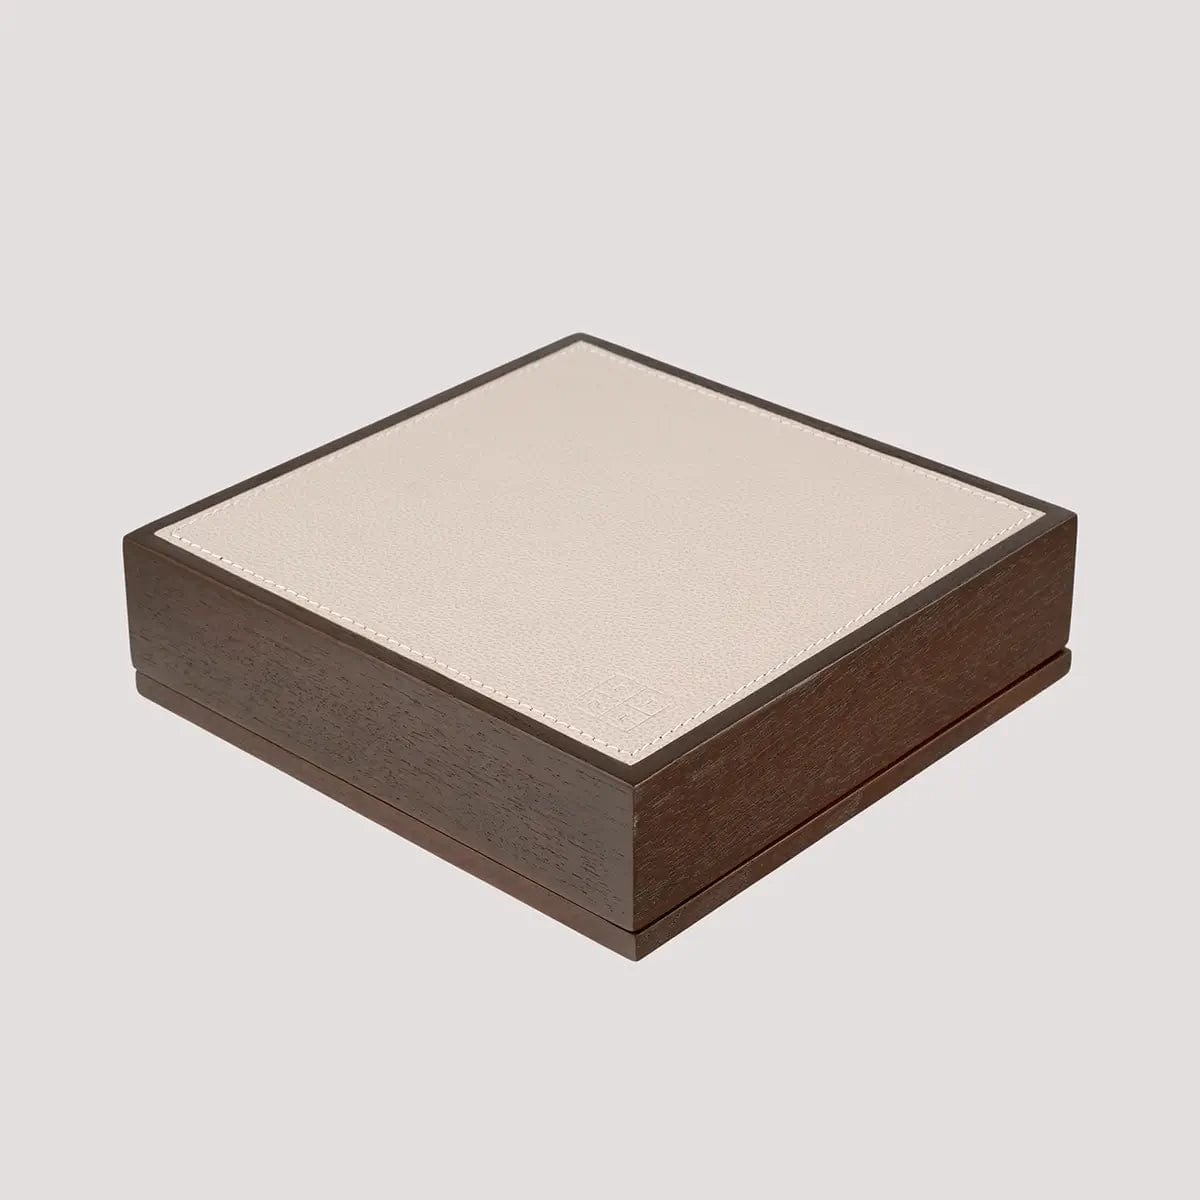 Eccotrading Design London Accessories Tic Tac Toe Leather Box Pumice House of Isabella UK